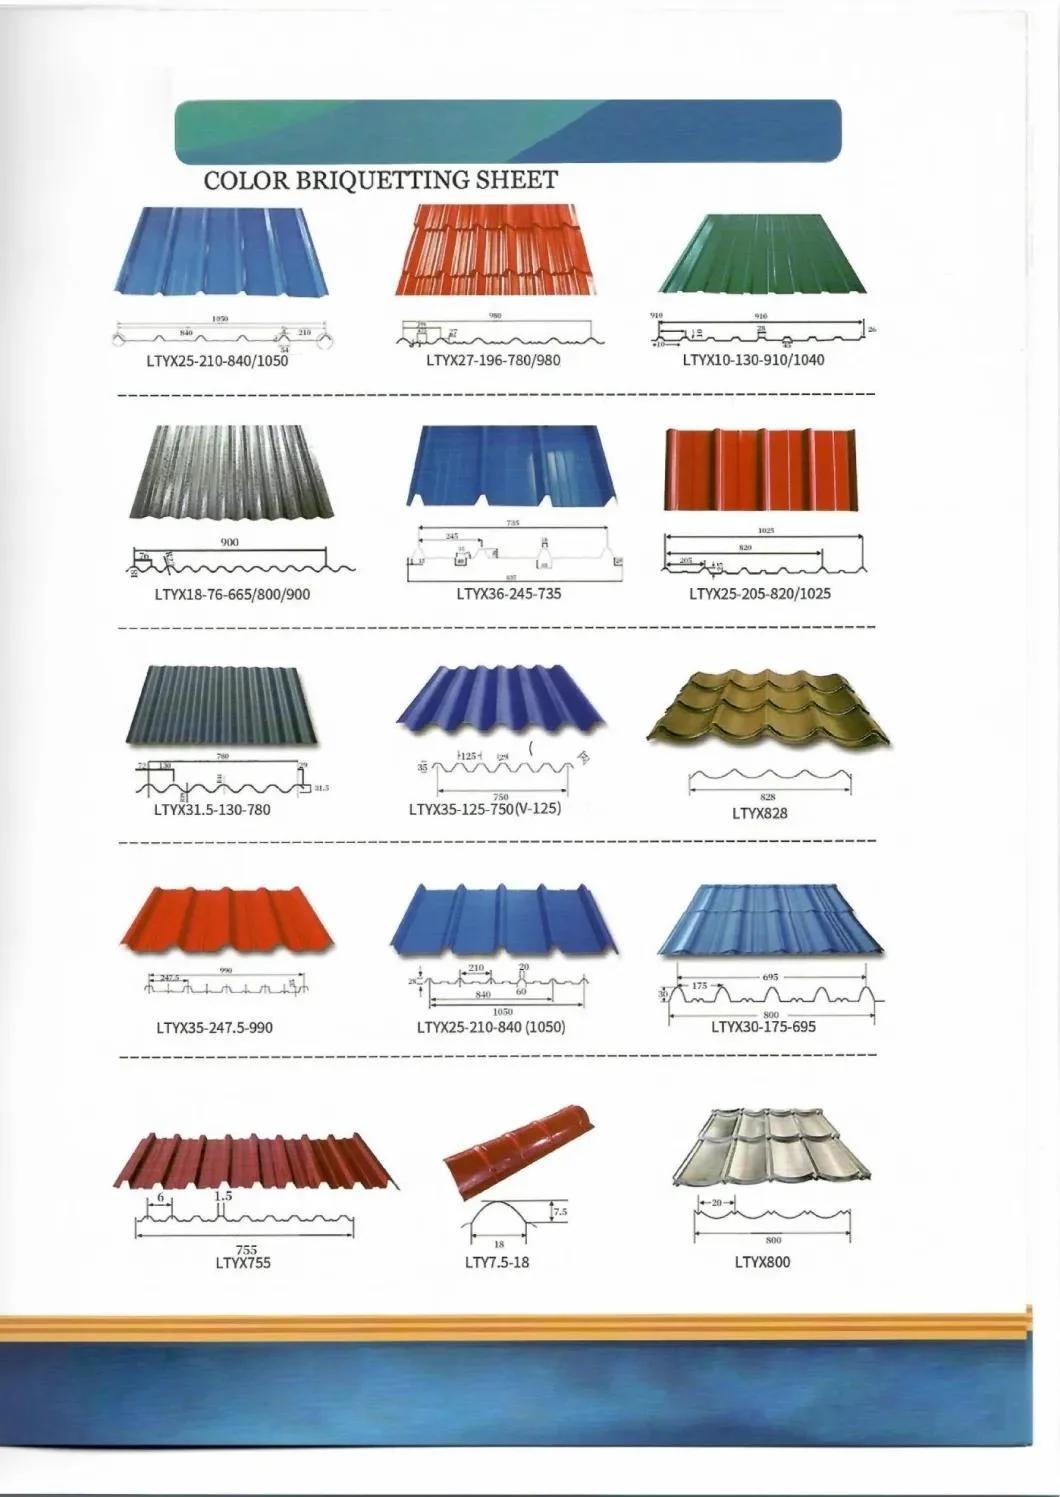 High Quality Cold Rolled Steel Plate Sheet Color Coated 28 Gauge Corrugated Steel Roofing Sheet